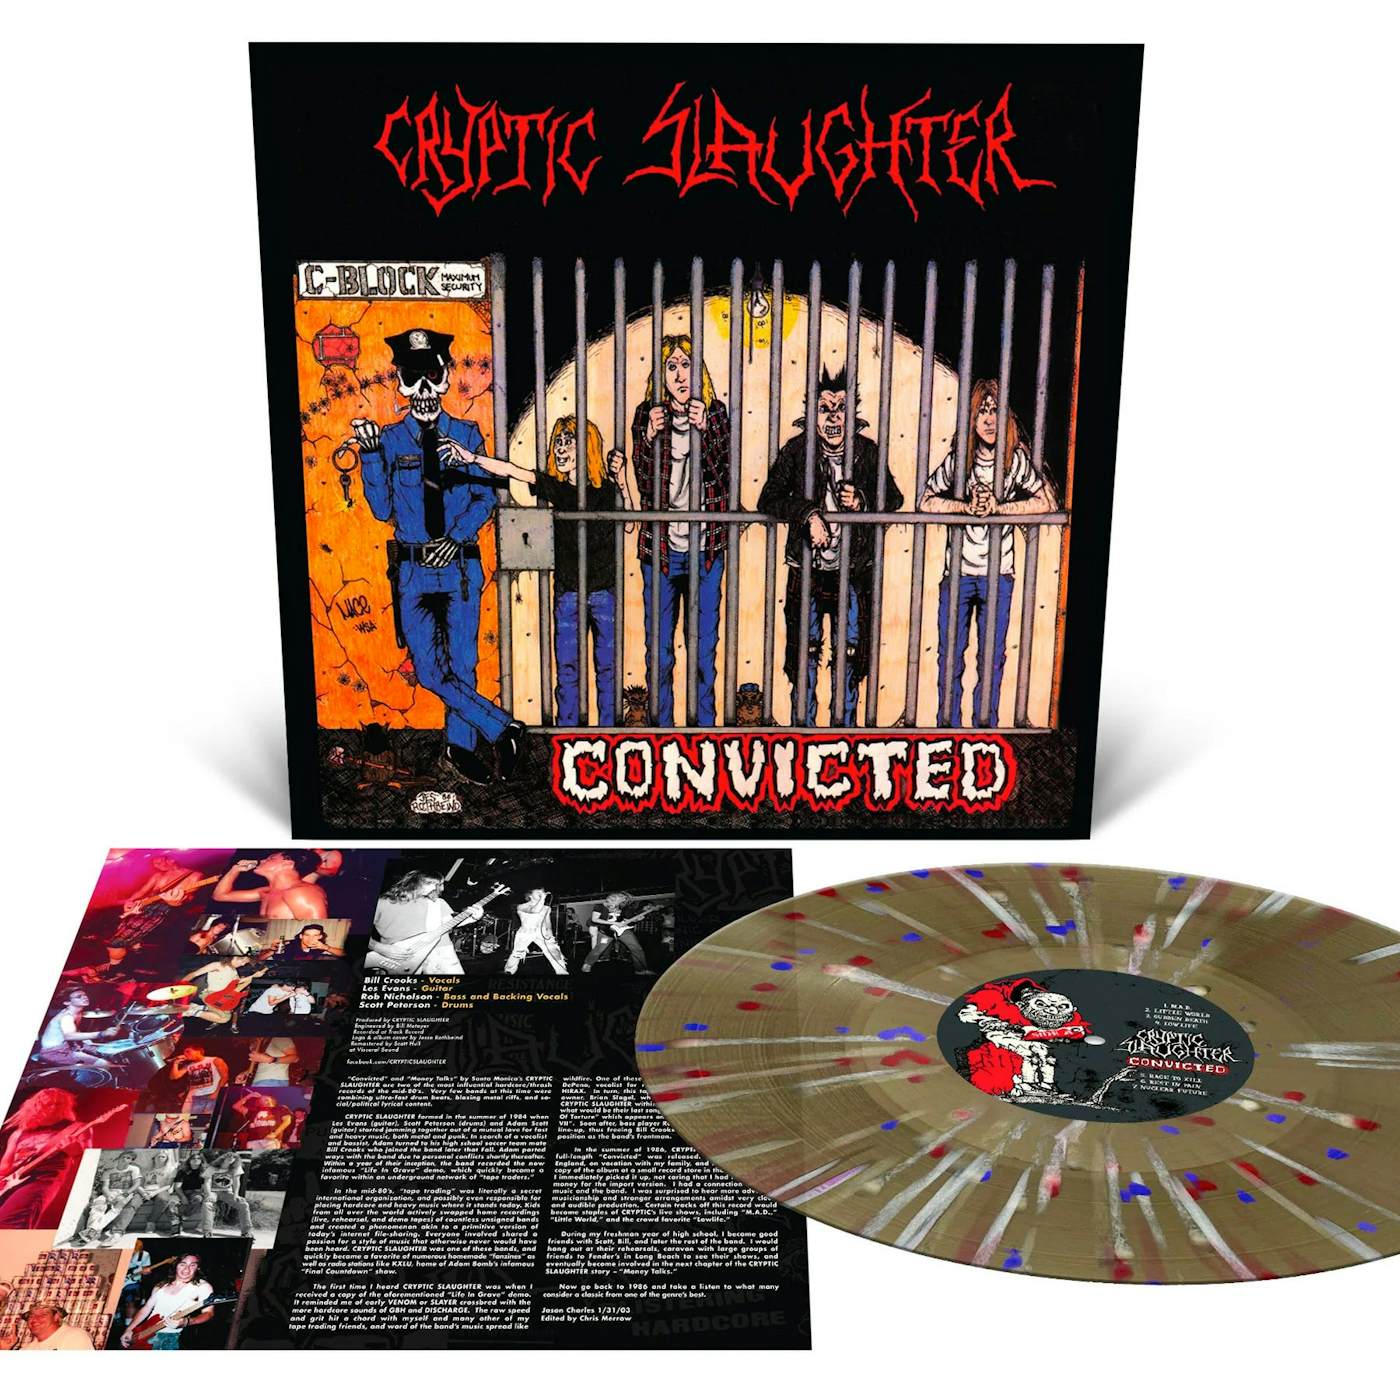 Cryptic Slaughter "Convicted" 12" (Vinyl)